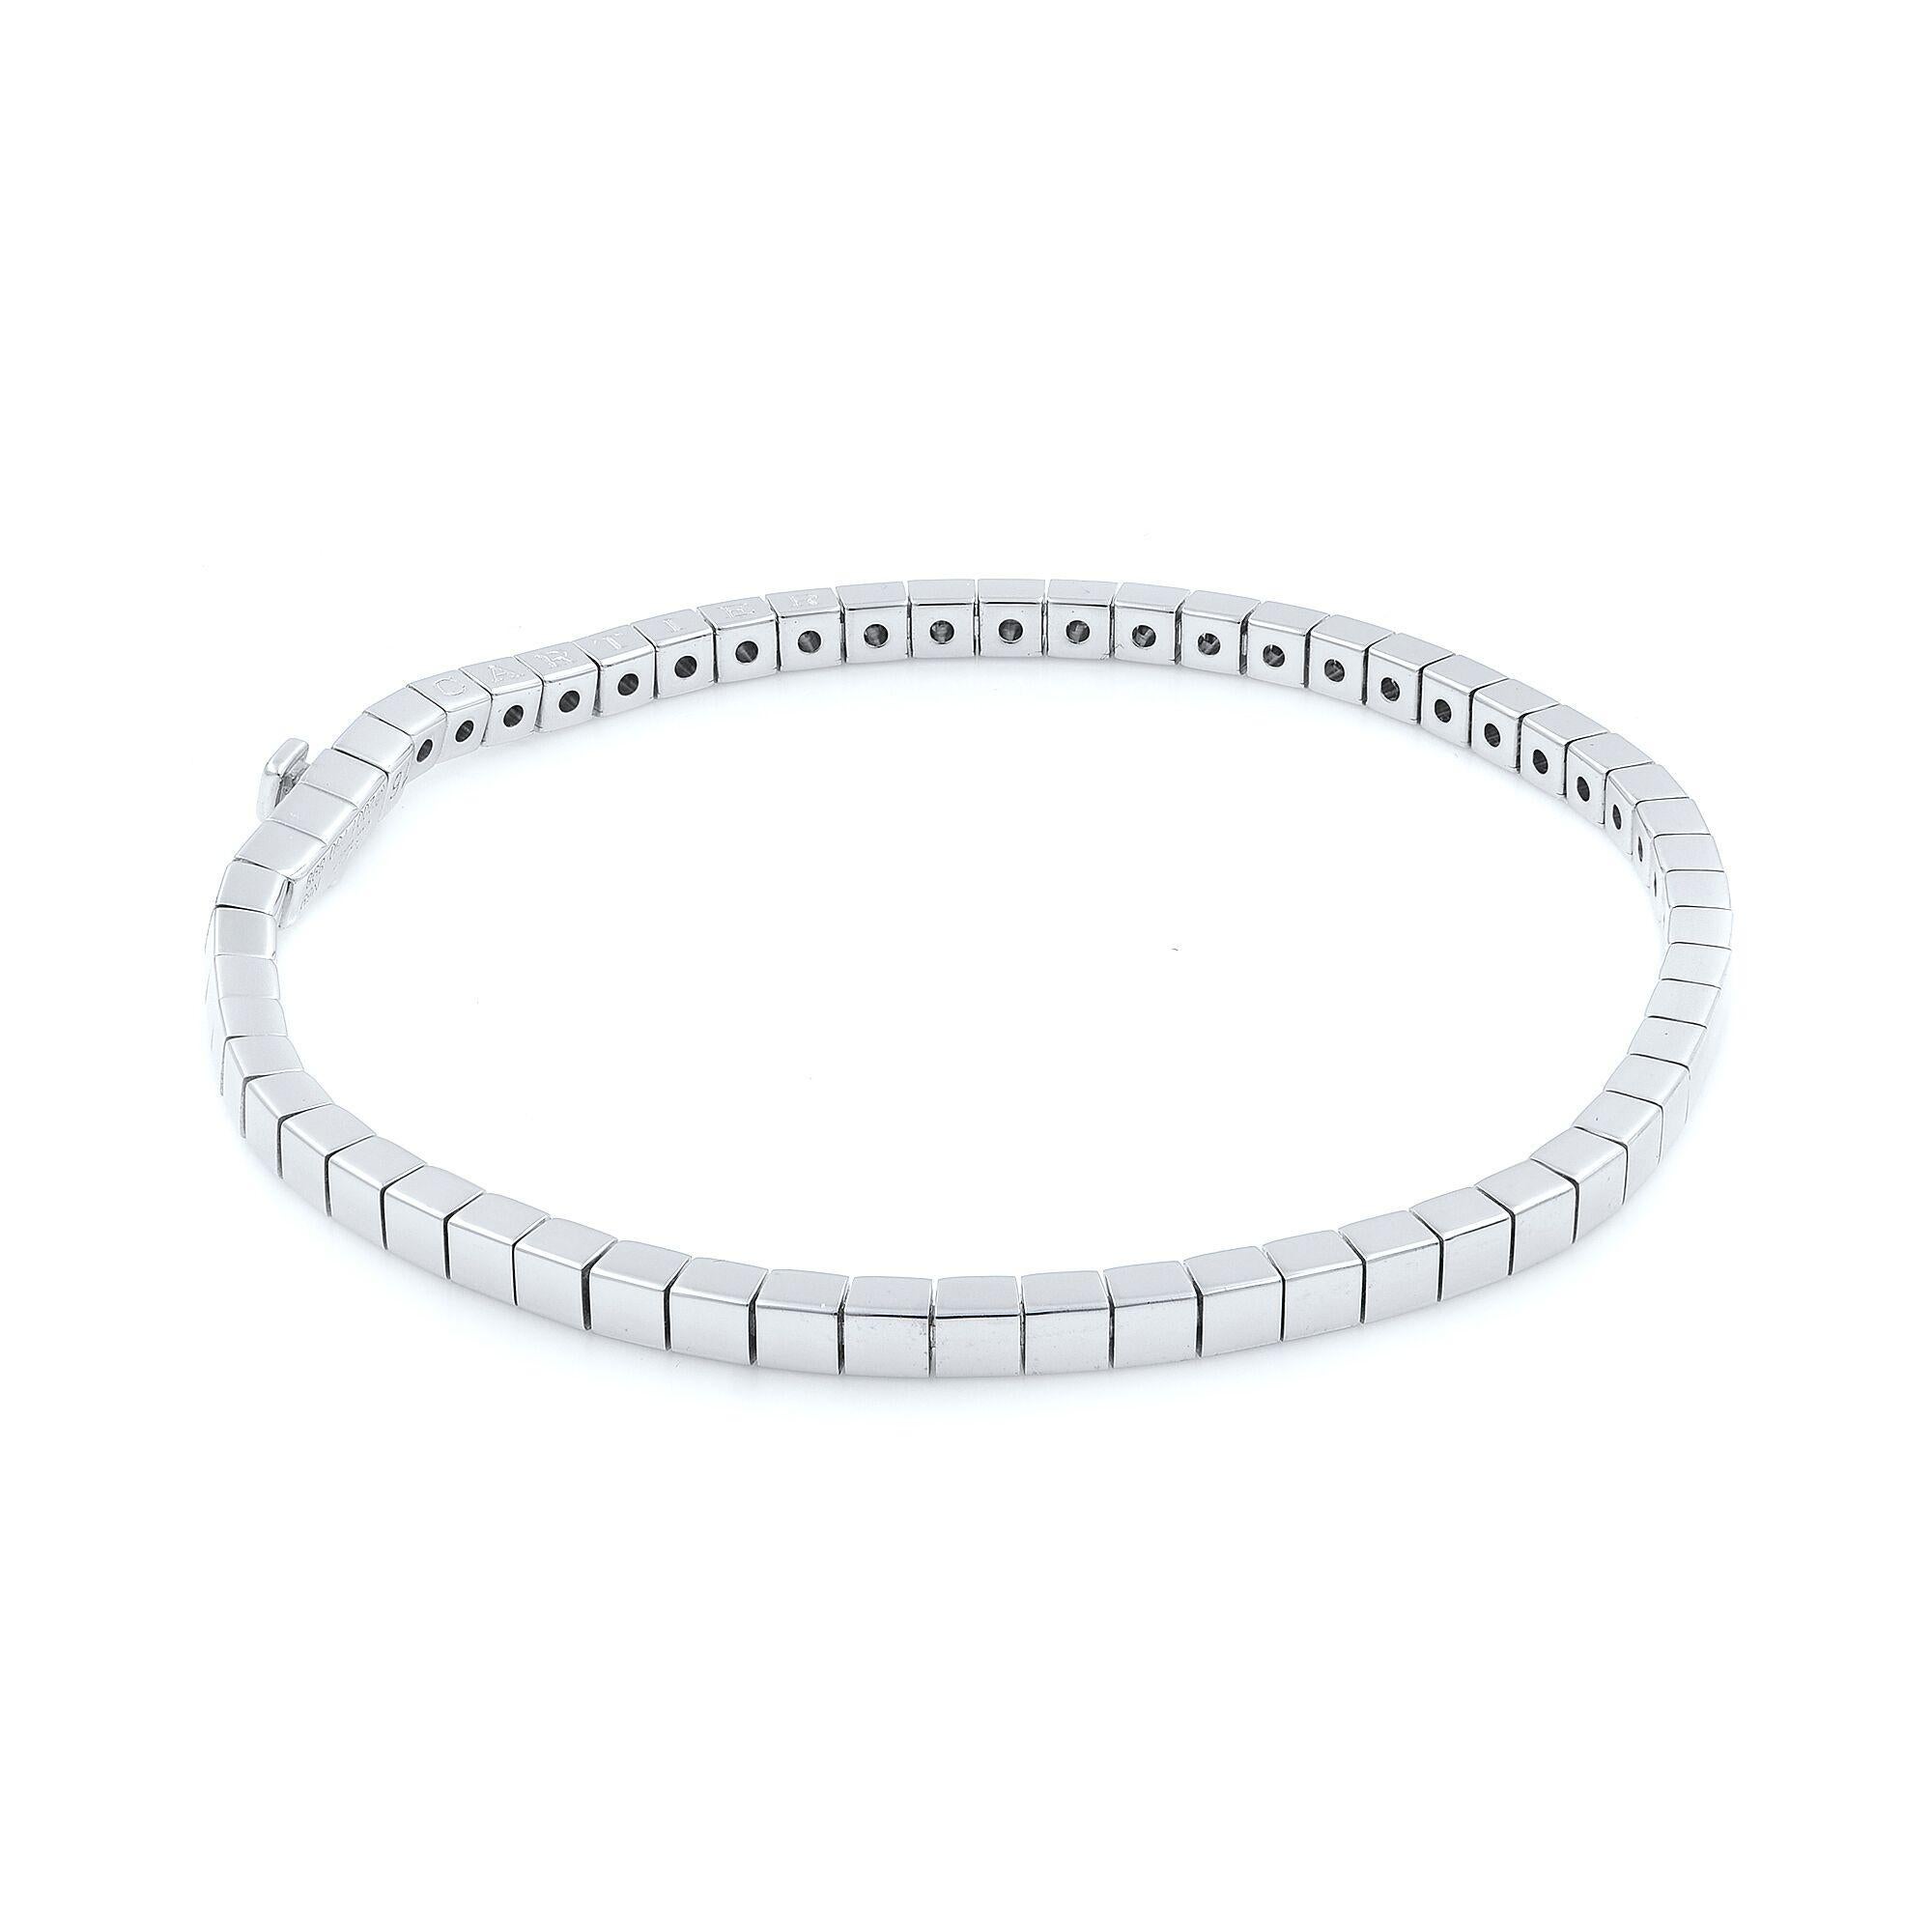 Lanieres segmented bracelet from Estate Cartier Size 16.
Great pre-owned condition, no signs of wear are visible.
No box, no papers.
Polished 18-karat white gold.
Lenght: 7 inch 
Safety clasp.
Made in France.
